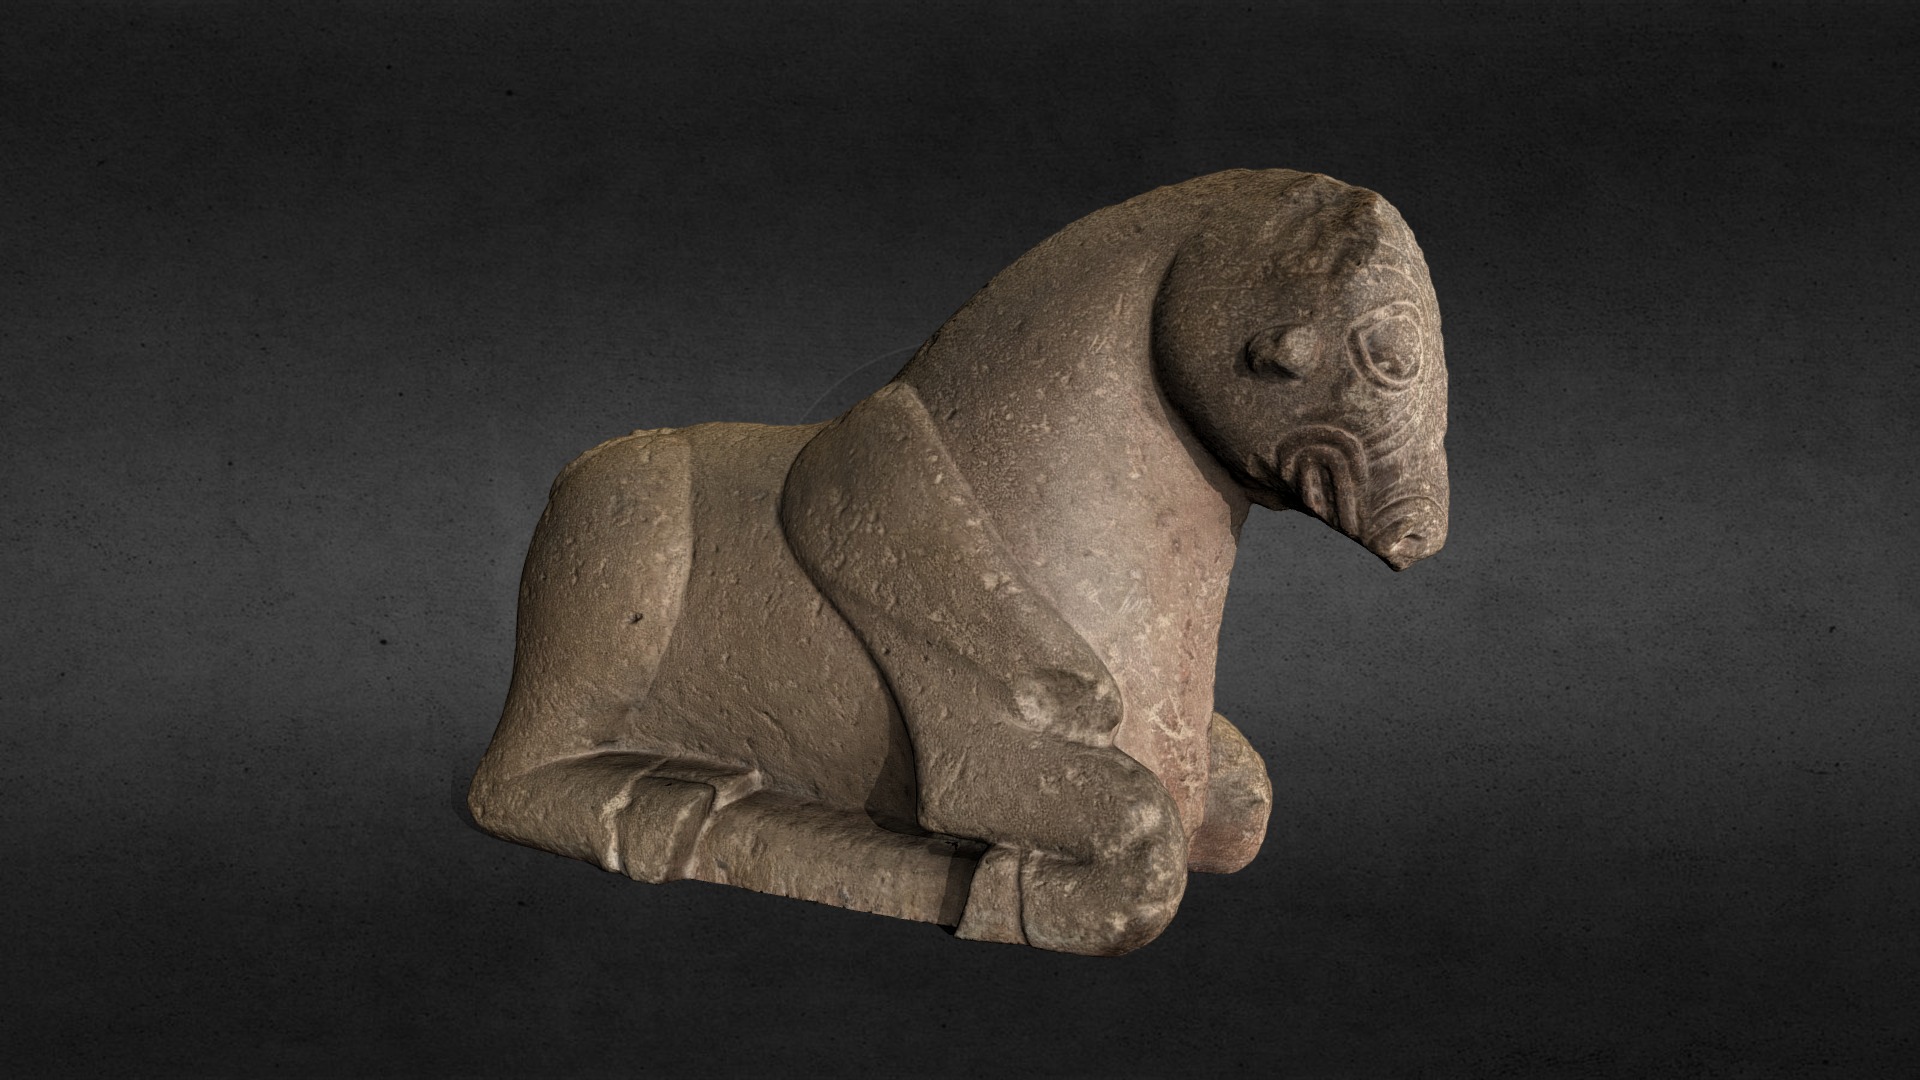 3D model Iberian bull - This is a 3D model of the Iberian bull. The 3D model is about a stone sculpture of a person.